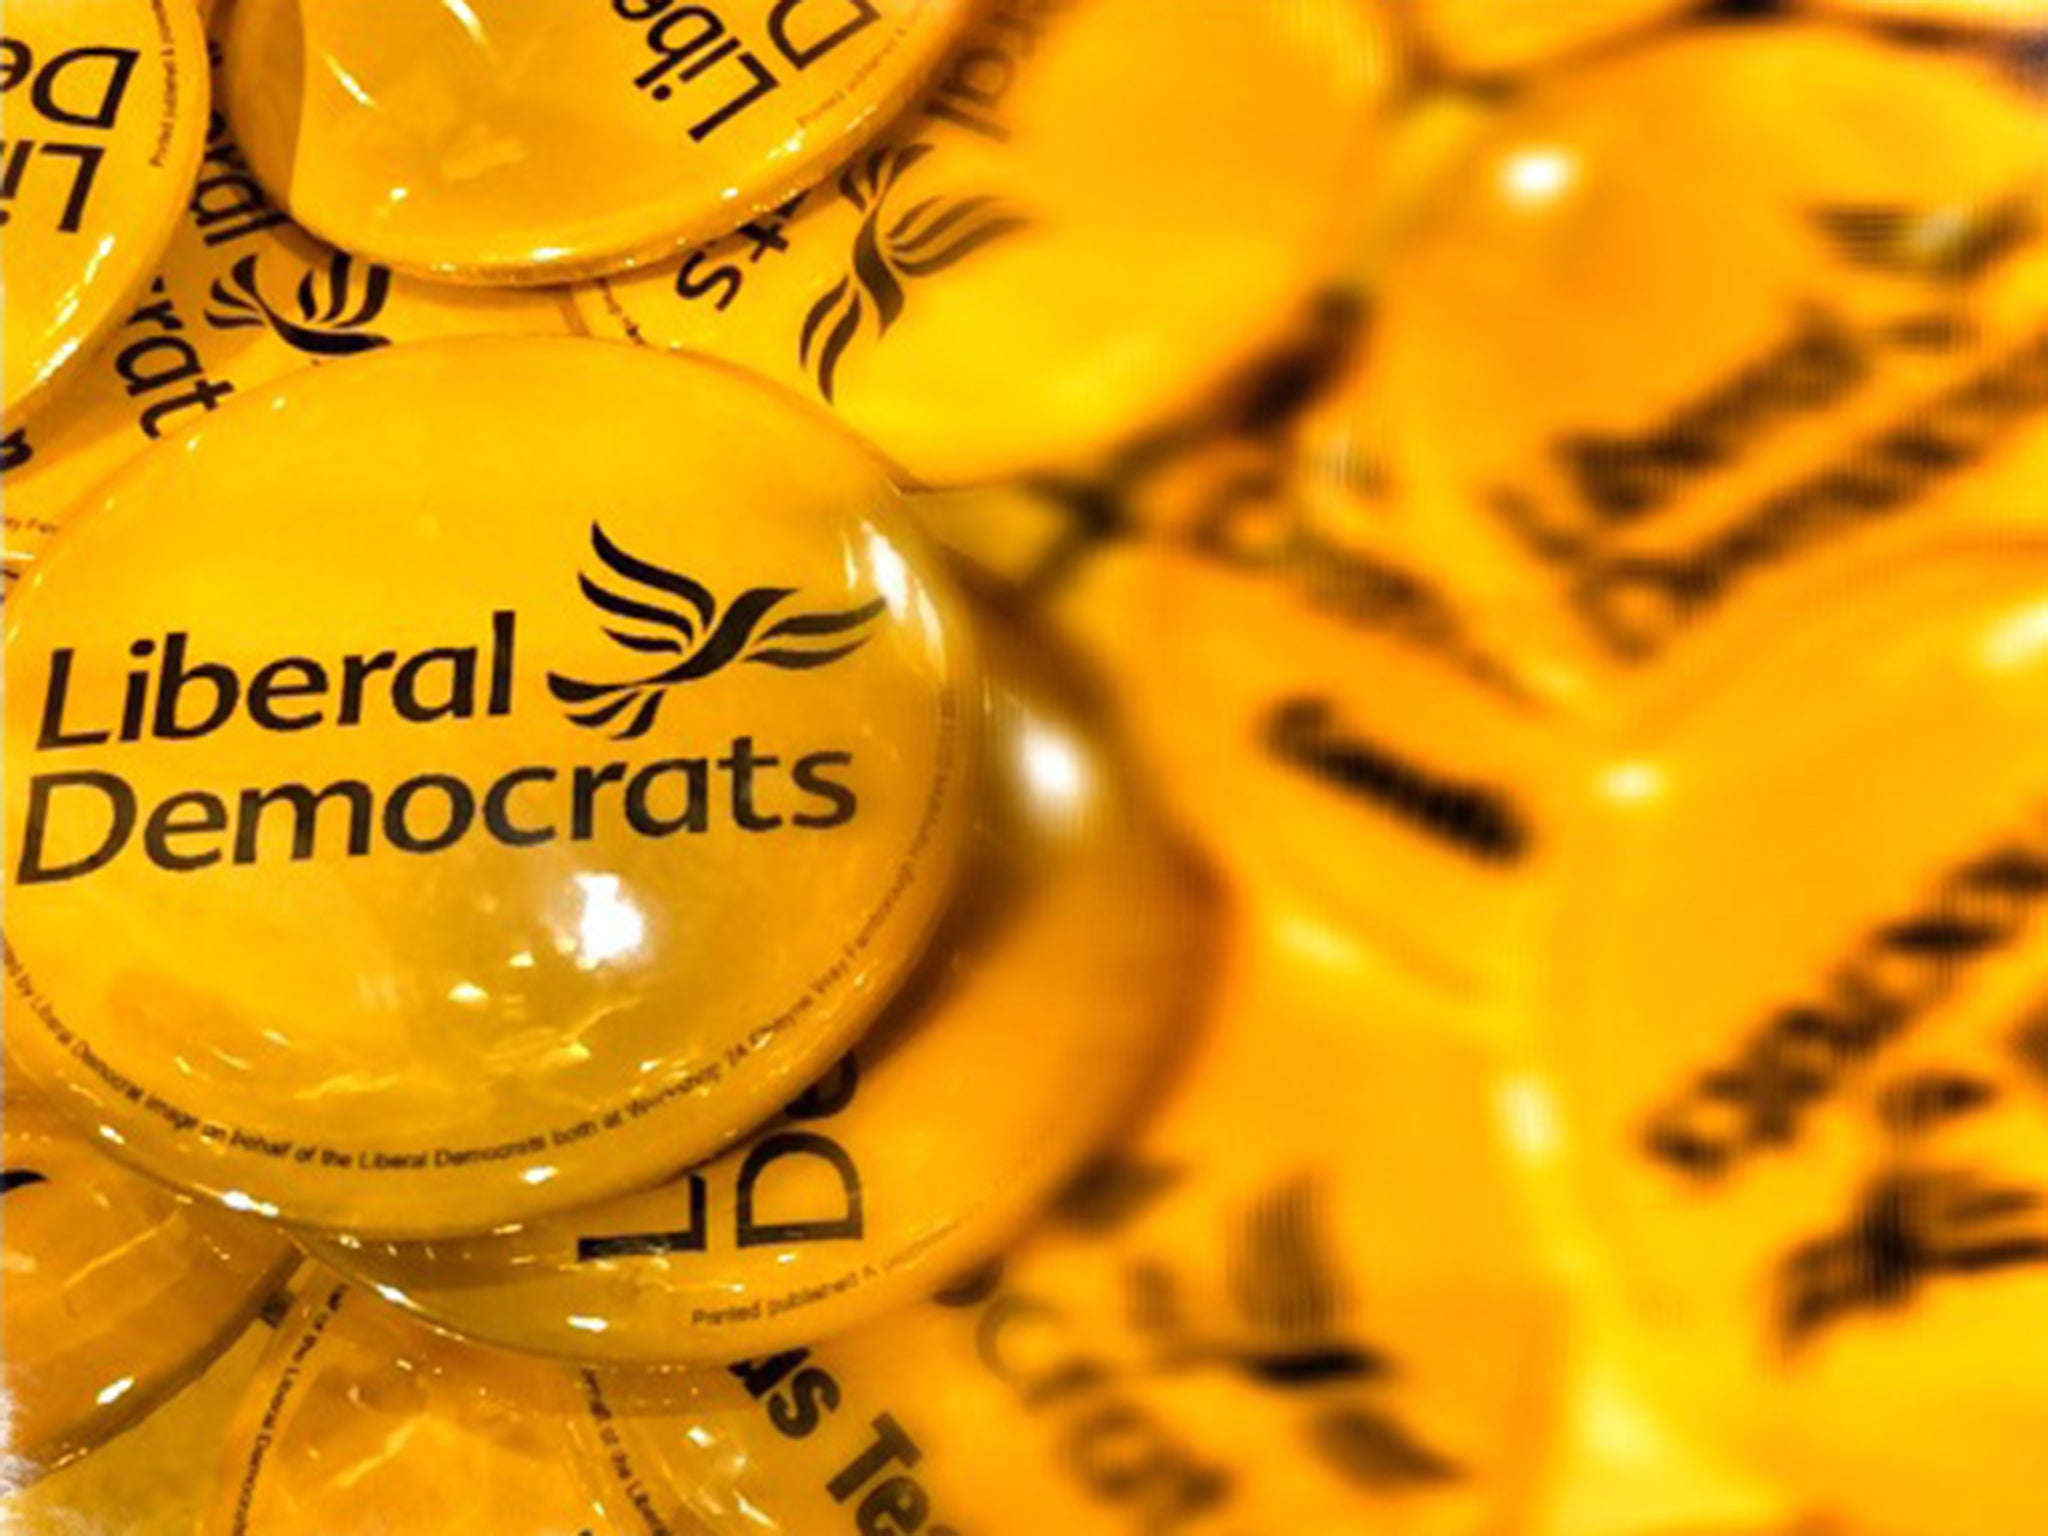 "Increasingly, it looks as if Clegg’s Liberals will be shunted into the discards bin. Yellow isn’t the new black"